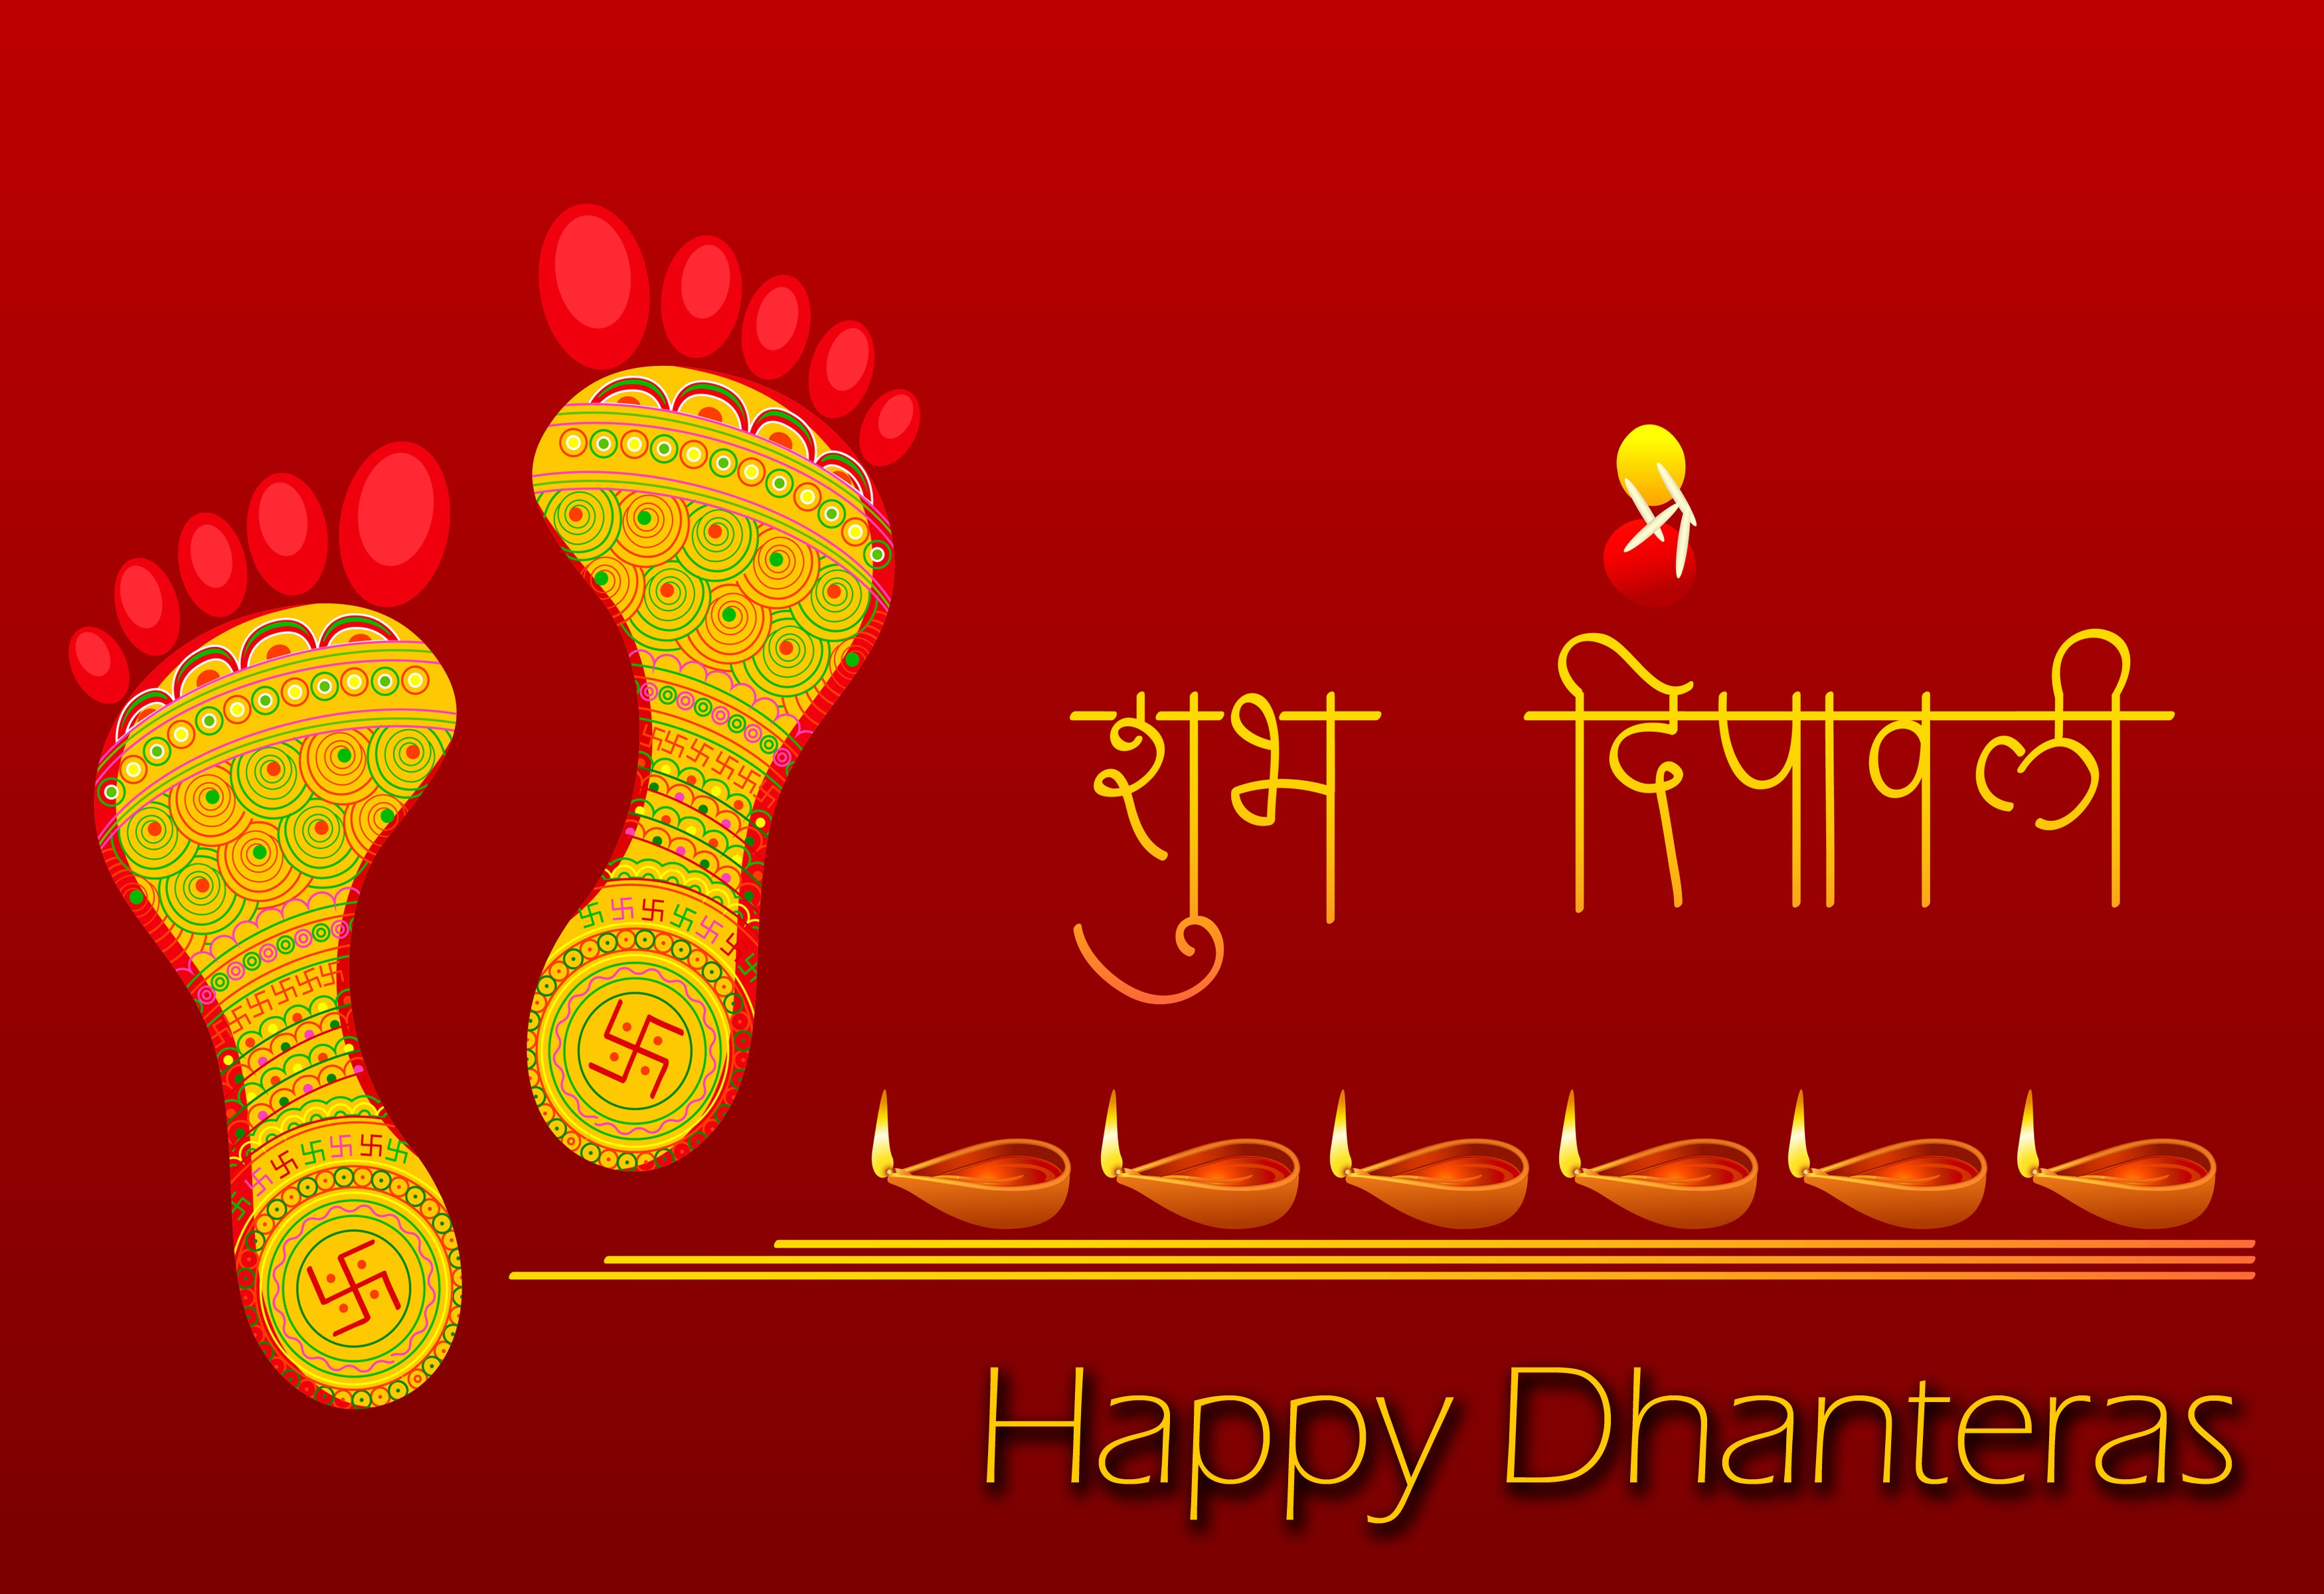 Download Free Happy Dhanteras HD Images